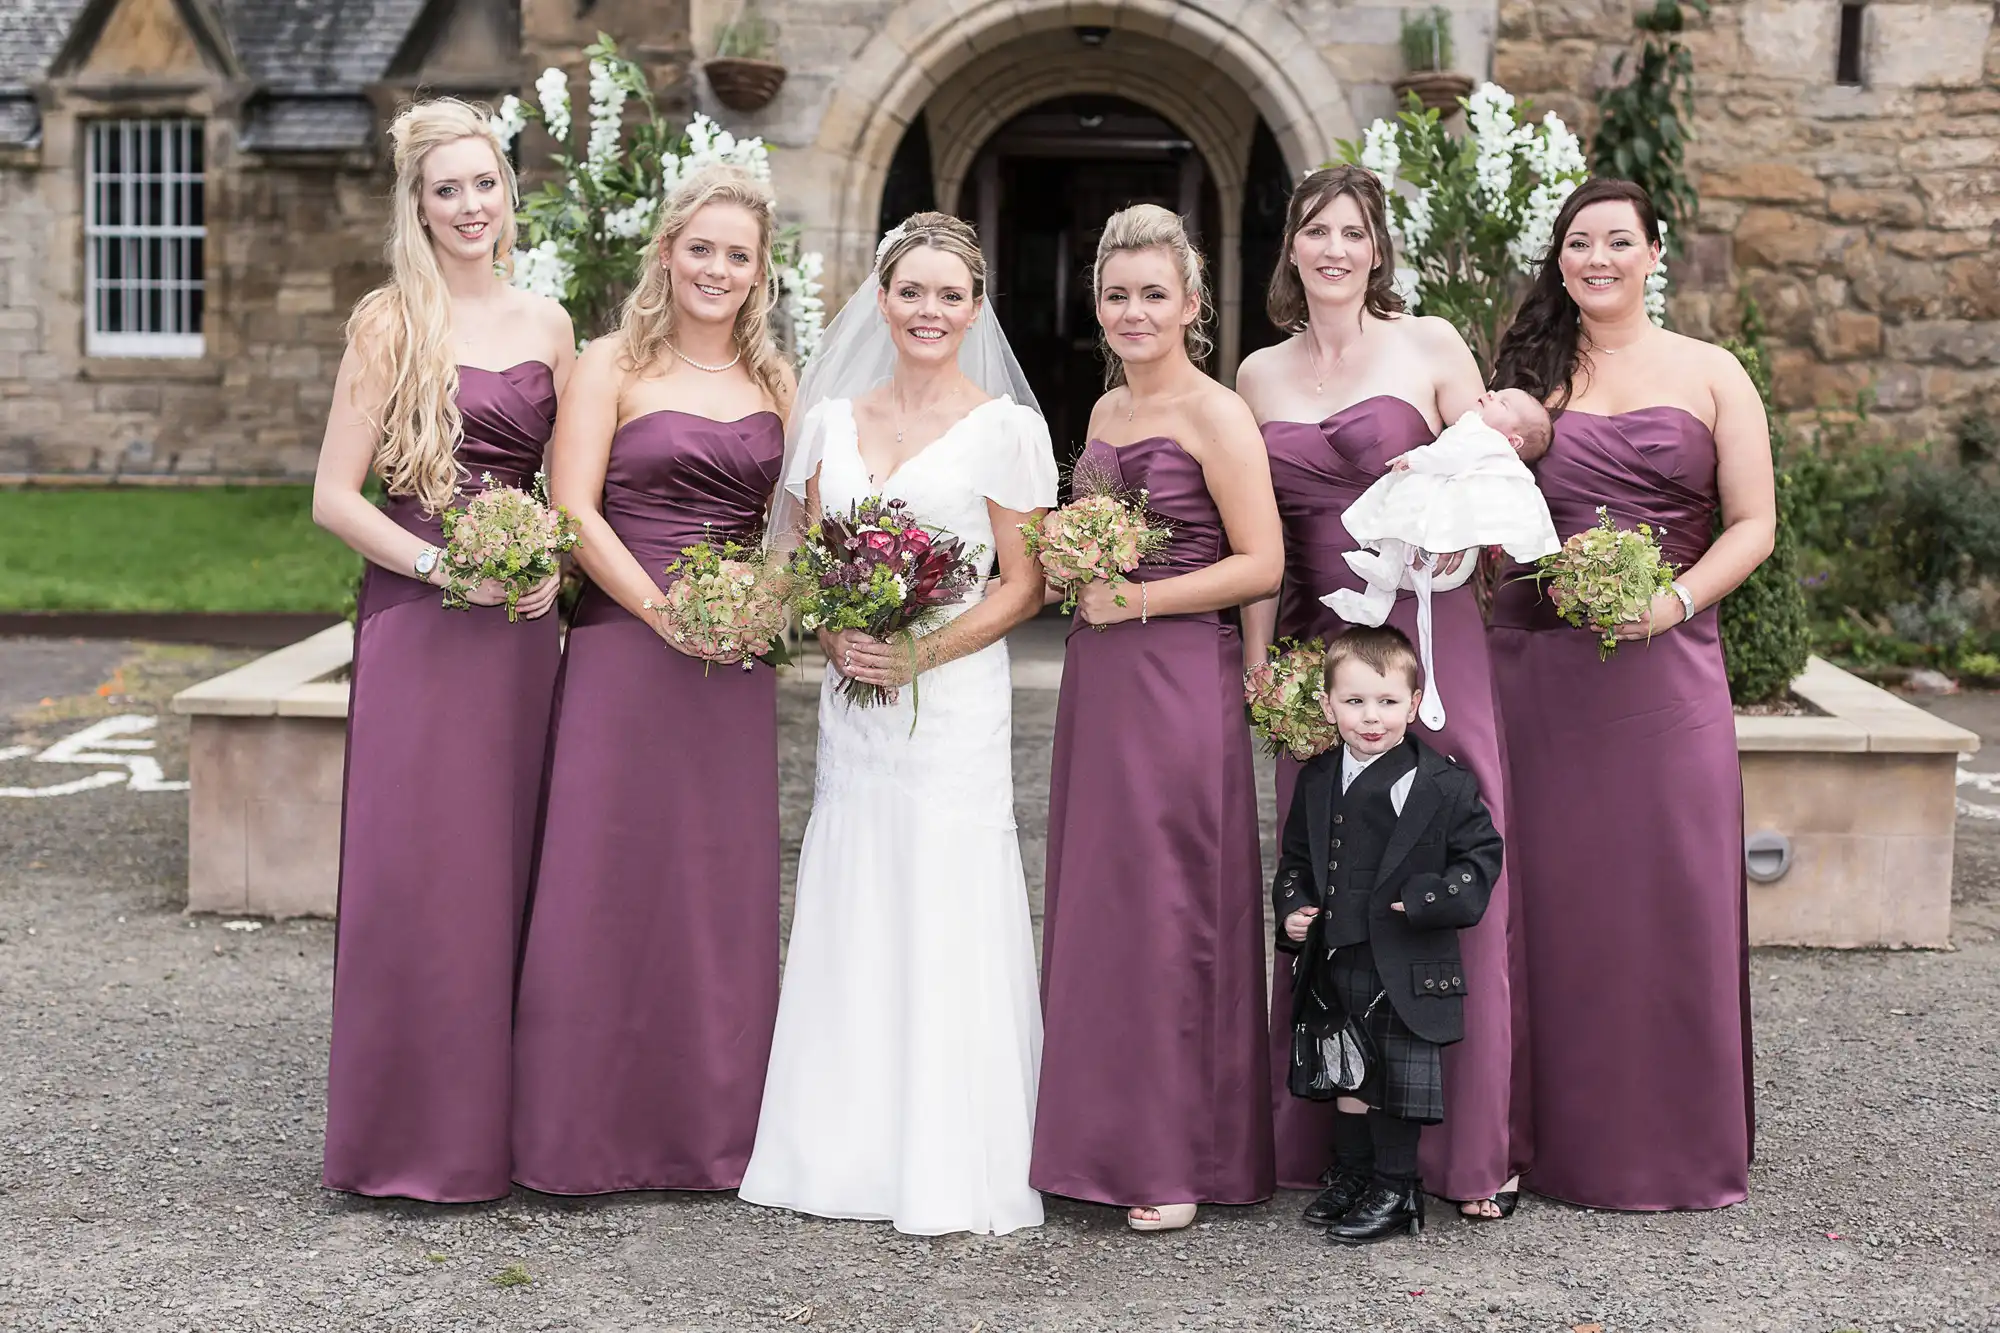 A bride in white stands with five bridesmaids in purple dresses and a young boy in a suit outside a stone building.